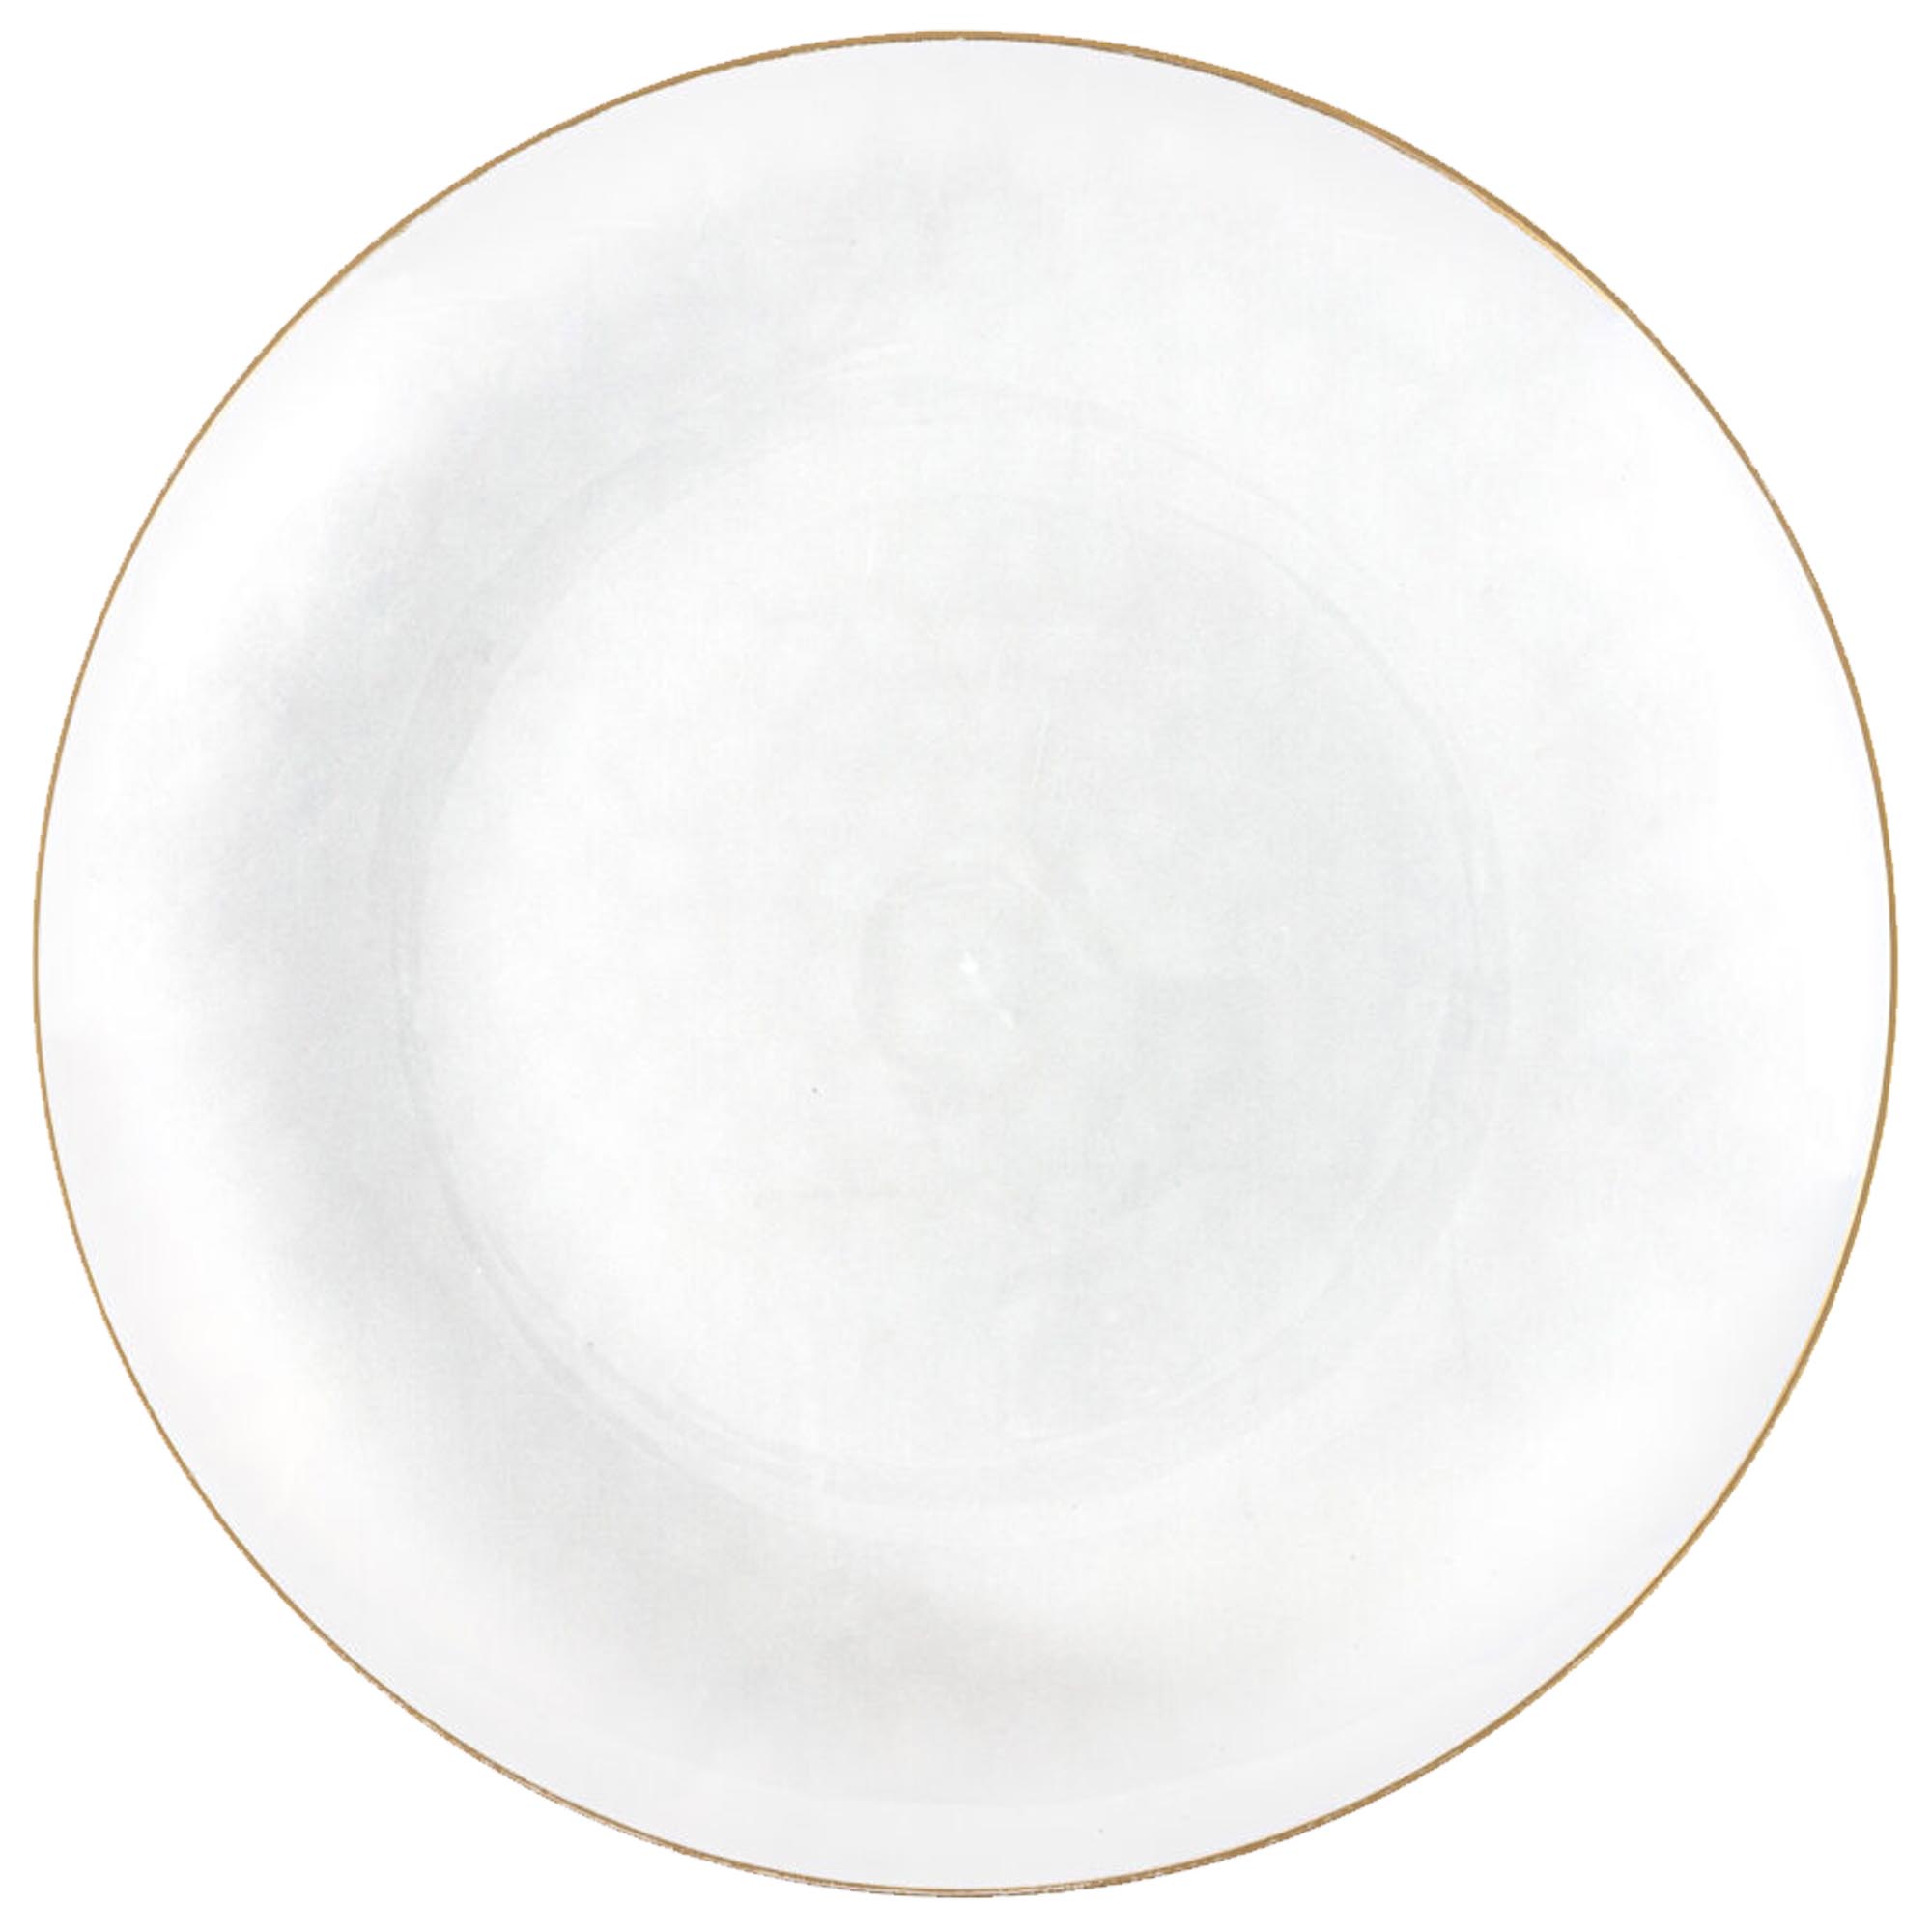 Plastic Party Plates  Household Supplies Disposable Plastic Plates Bbq plates  fancy disposable plates heavy duty plates classic elegant  sturdy plates  reusable wedding dinner salad `dessert  plates catering high quality birthday  anniversary plating